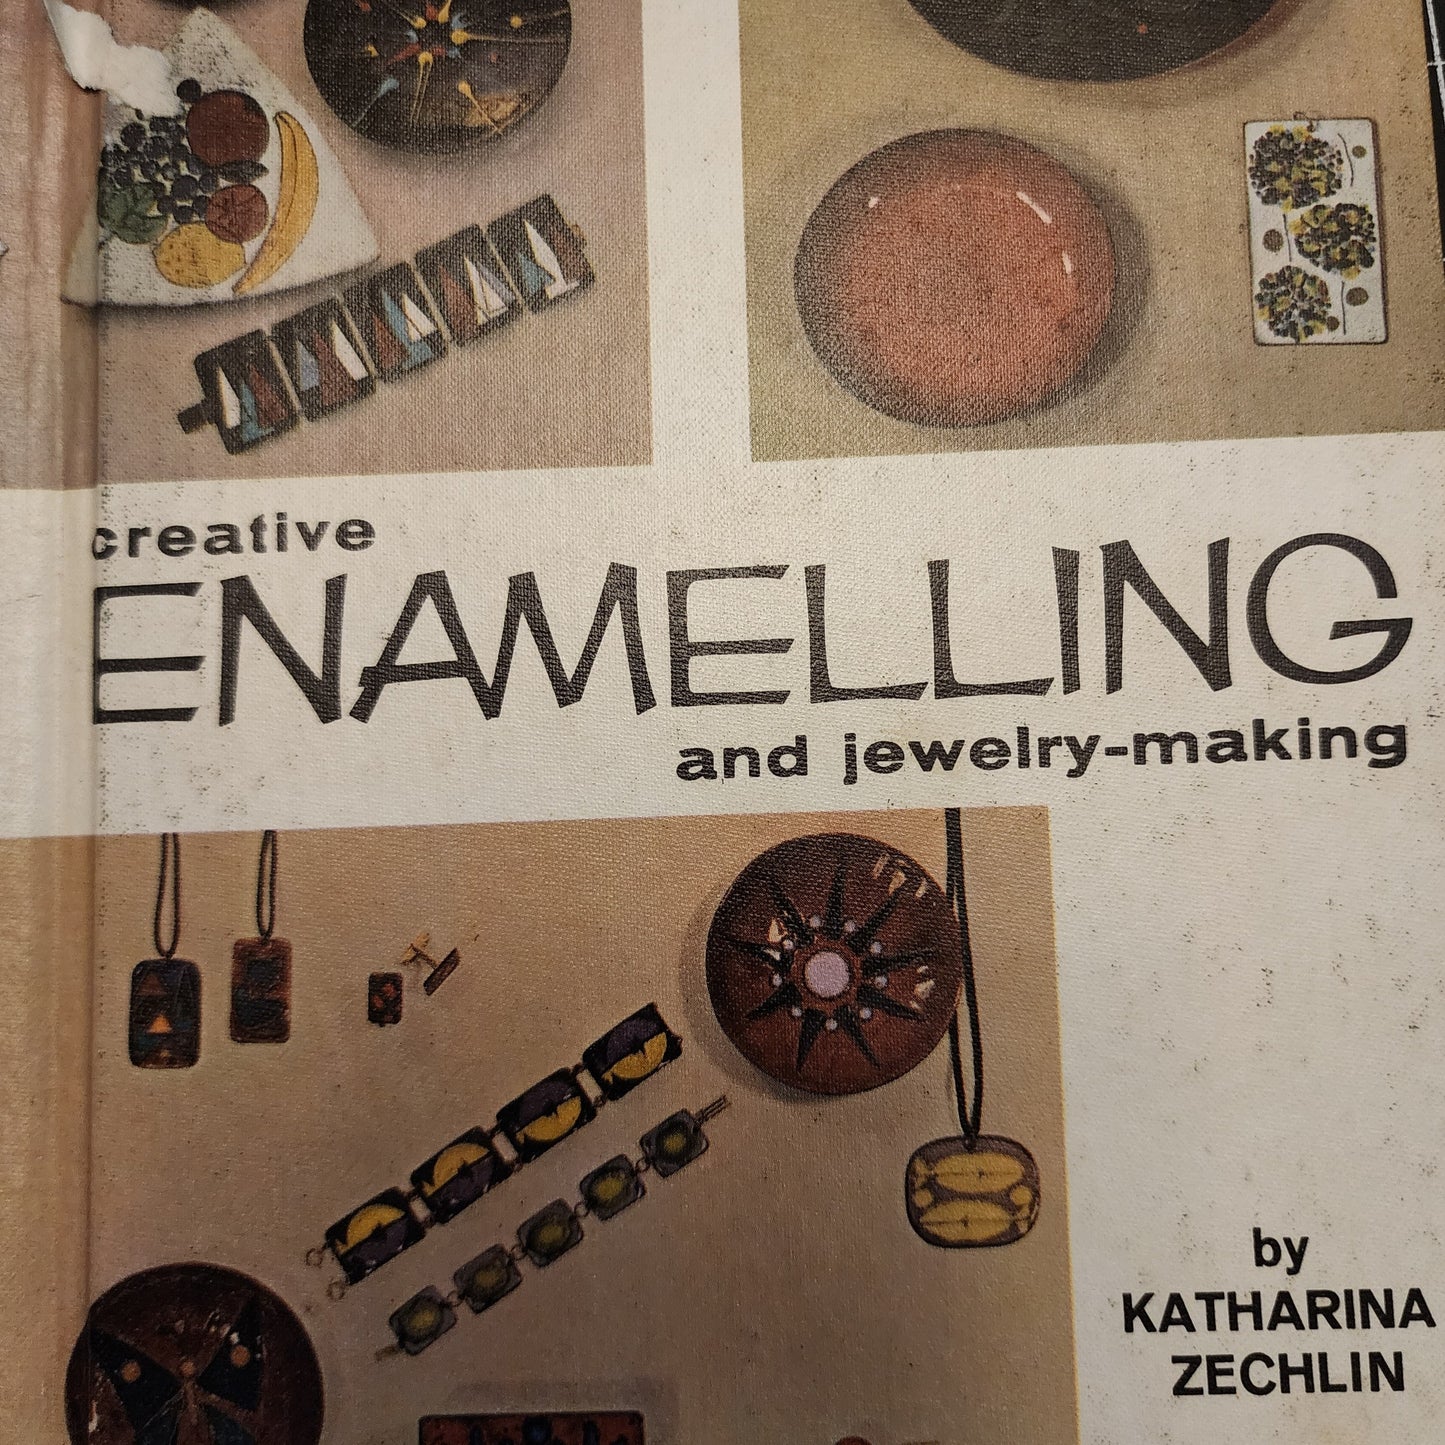 The Emporium Book Shelf  - Creative Enamelling and Jewelry Making